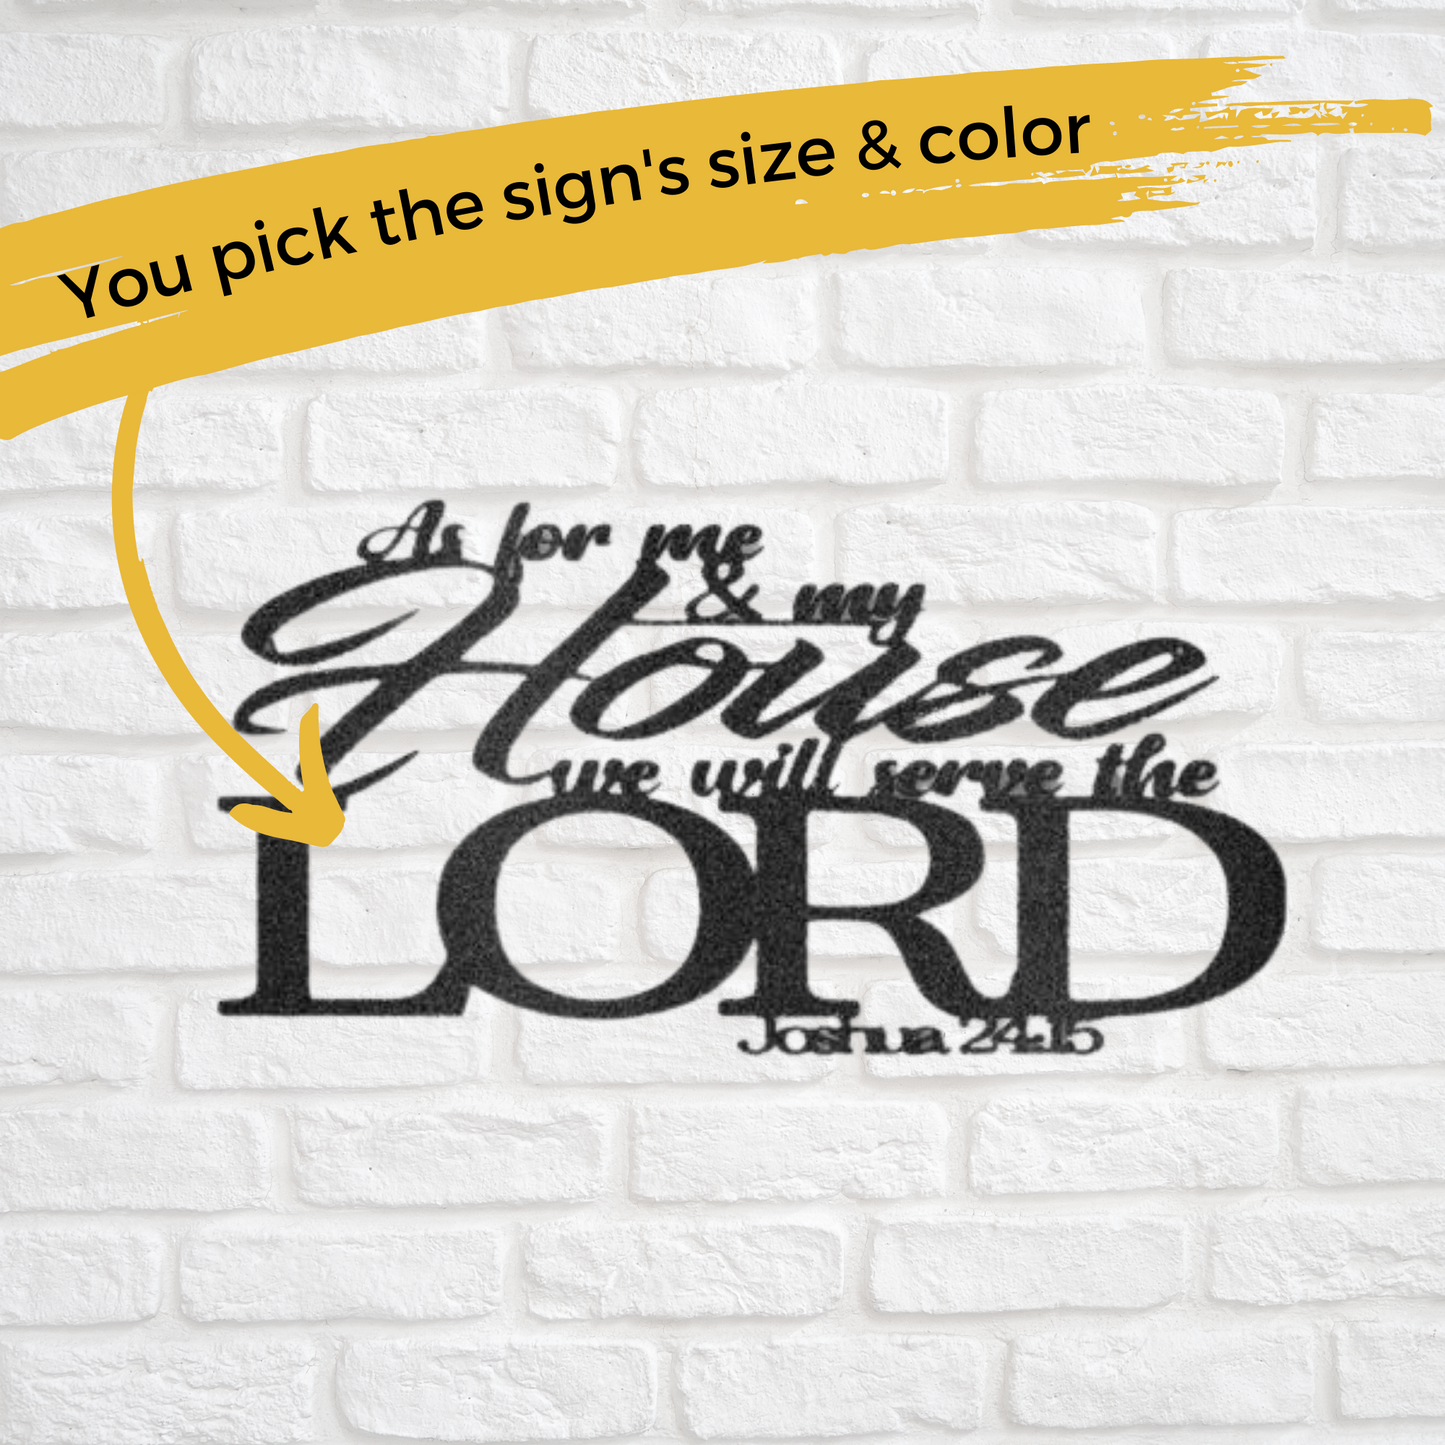 "...We Will Serve the Lord" Joshua 24:15, Steel Sign, Bible Verse Wall Decor, Christian, Scripture Wall Art, Bible Verse Sign